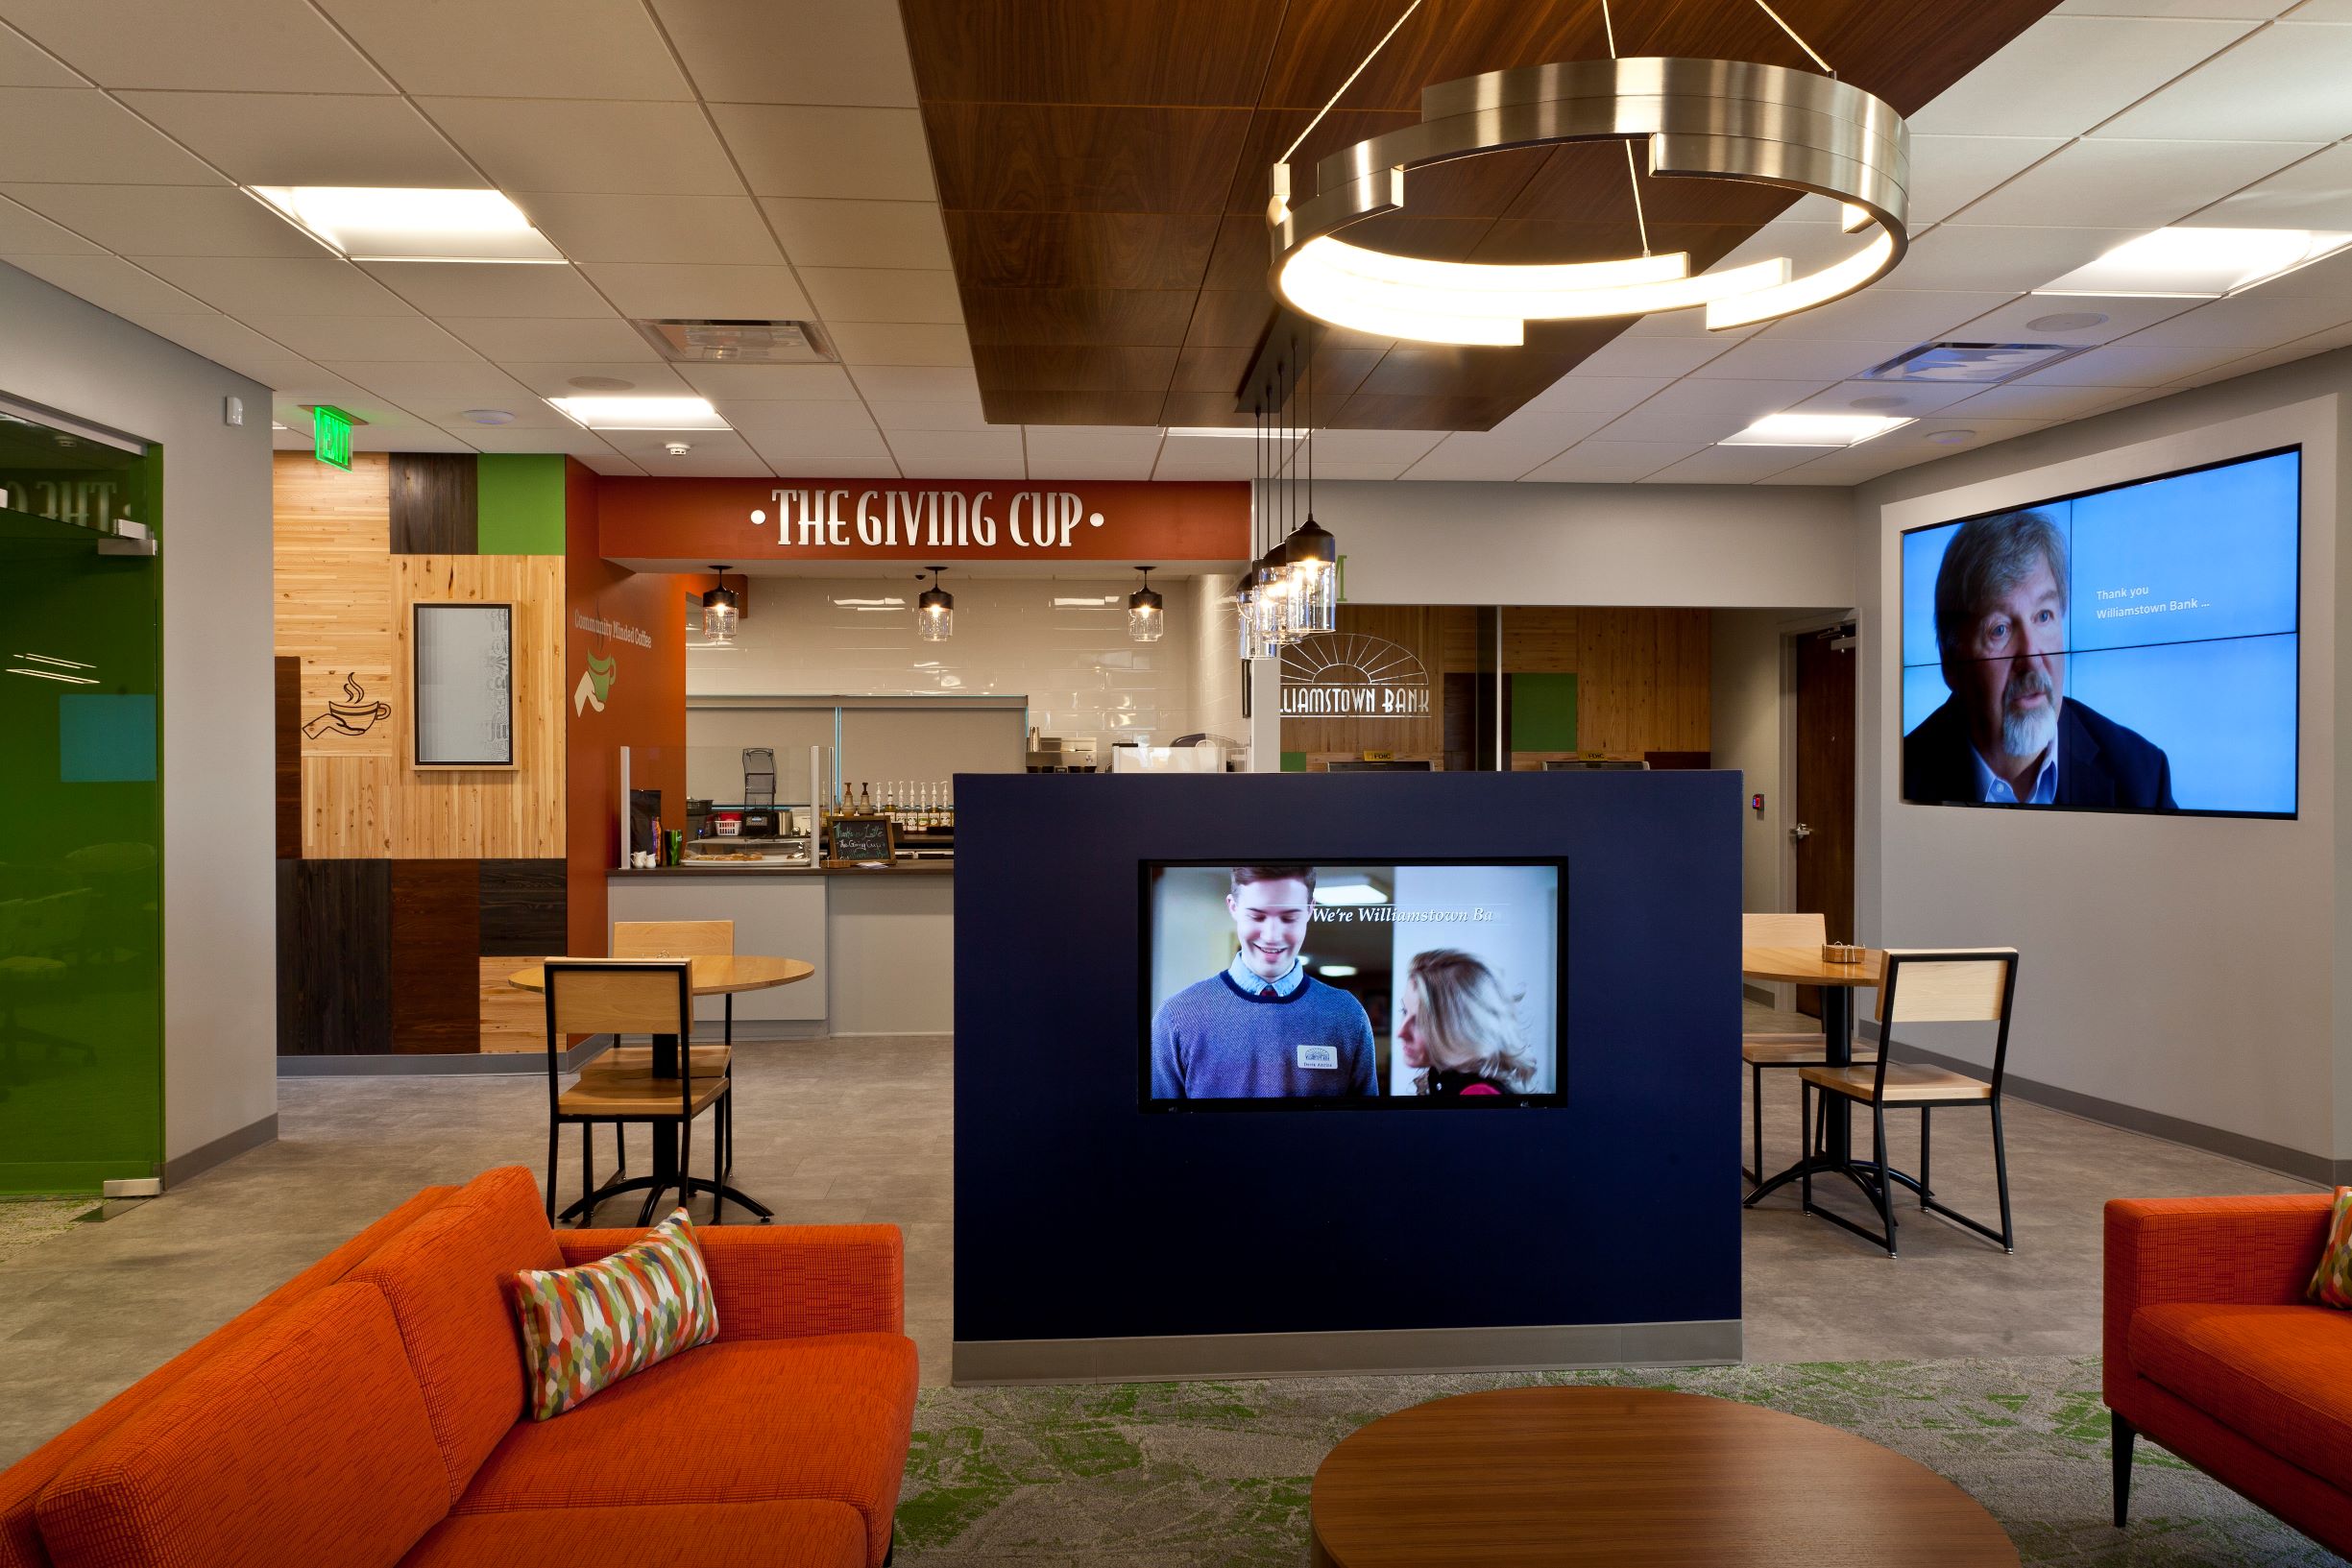 The customer lounge is filled with technology that displays branded Williamstown Bank content